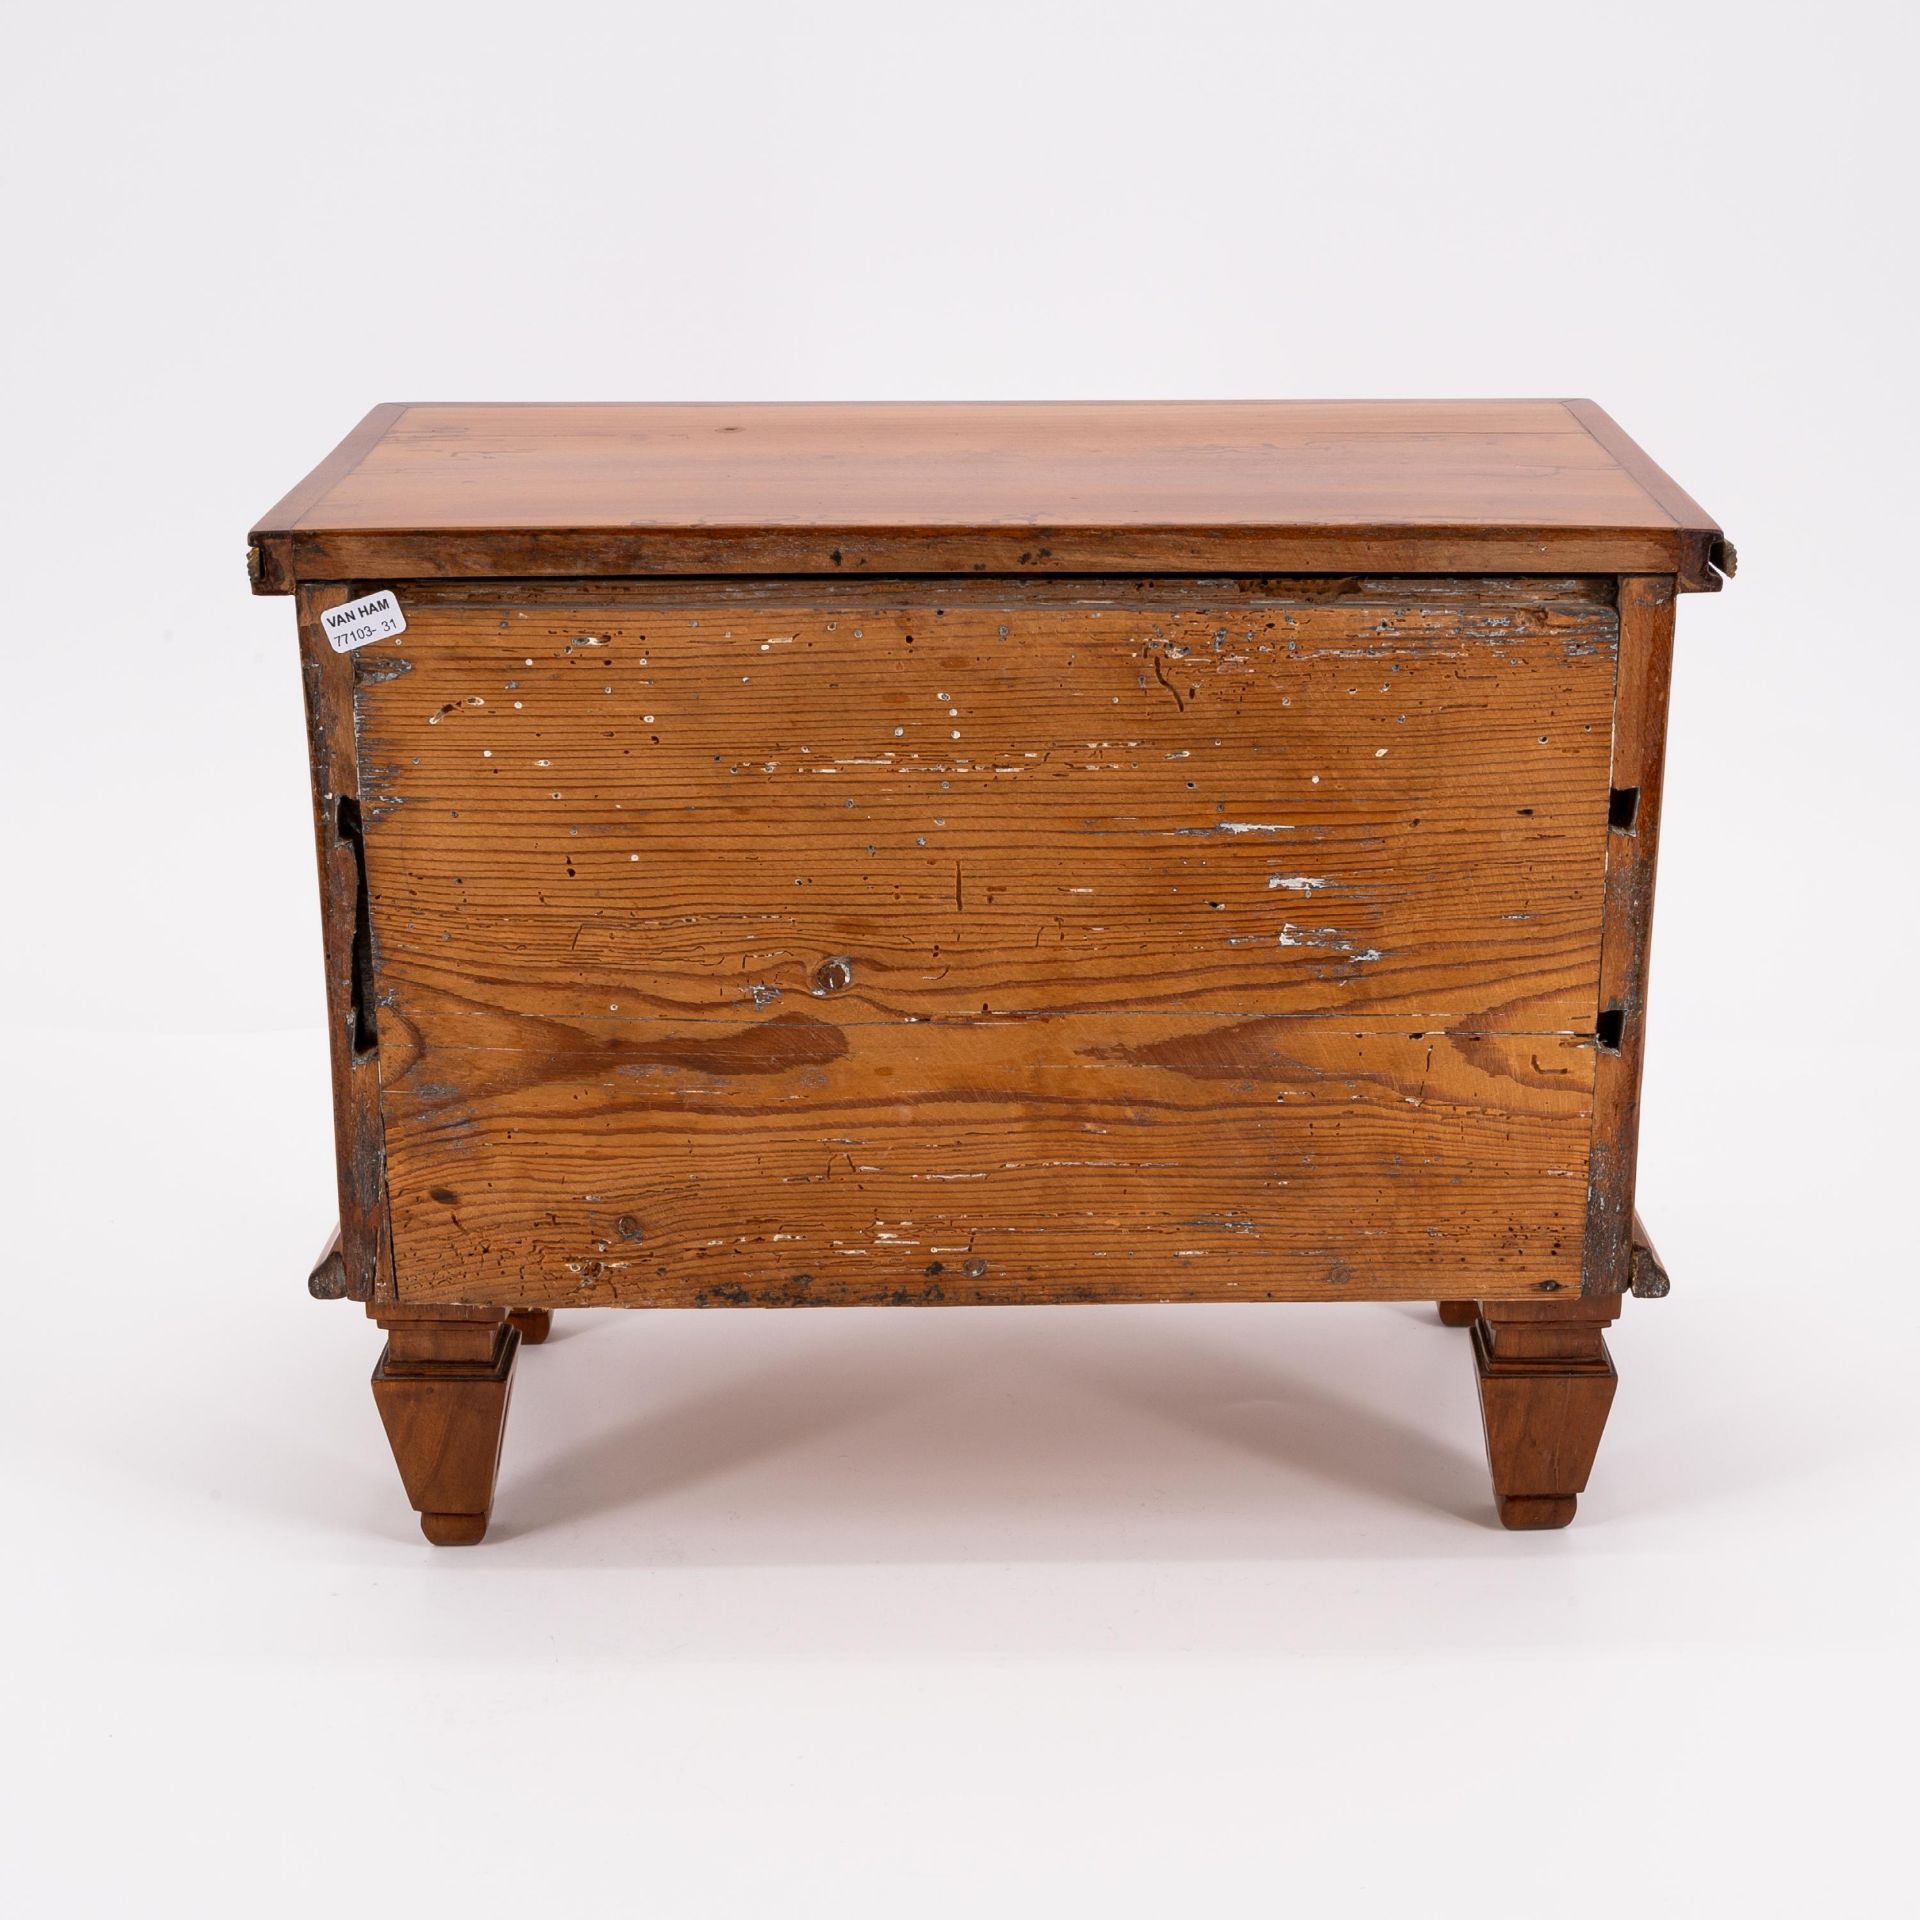 Germany: MINIATURE WOODEN BIEDERMEIER CHEST OF DRAWERS - Image 4 of 7